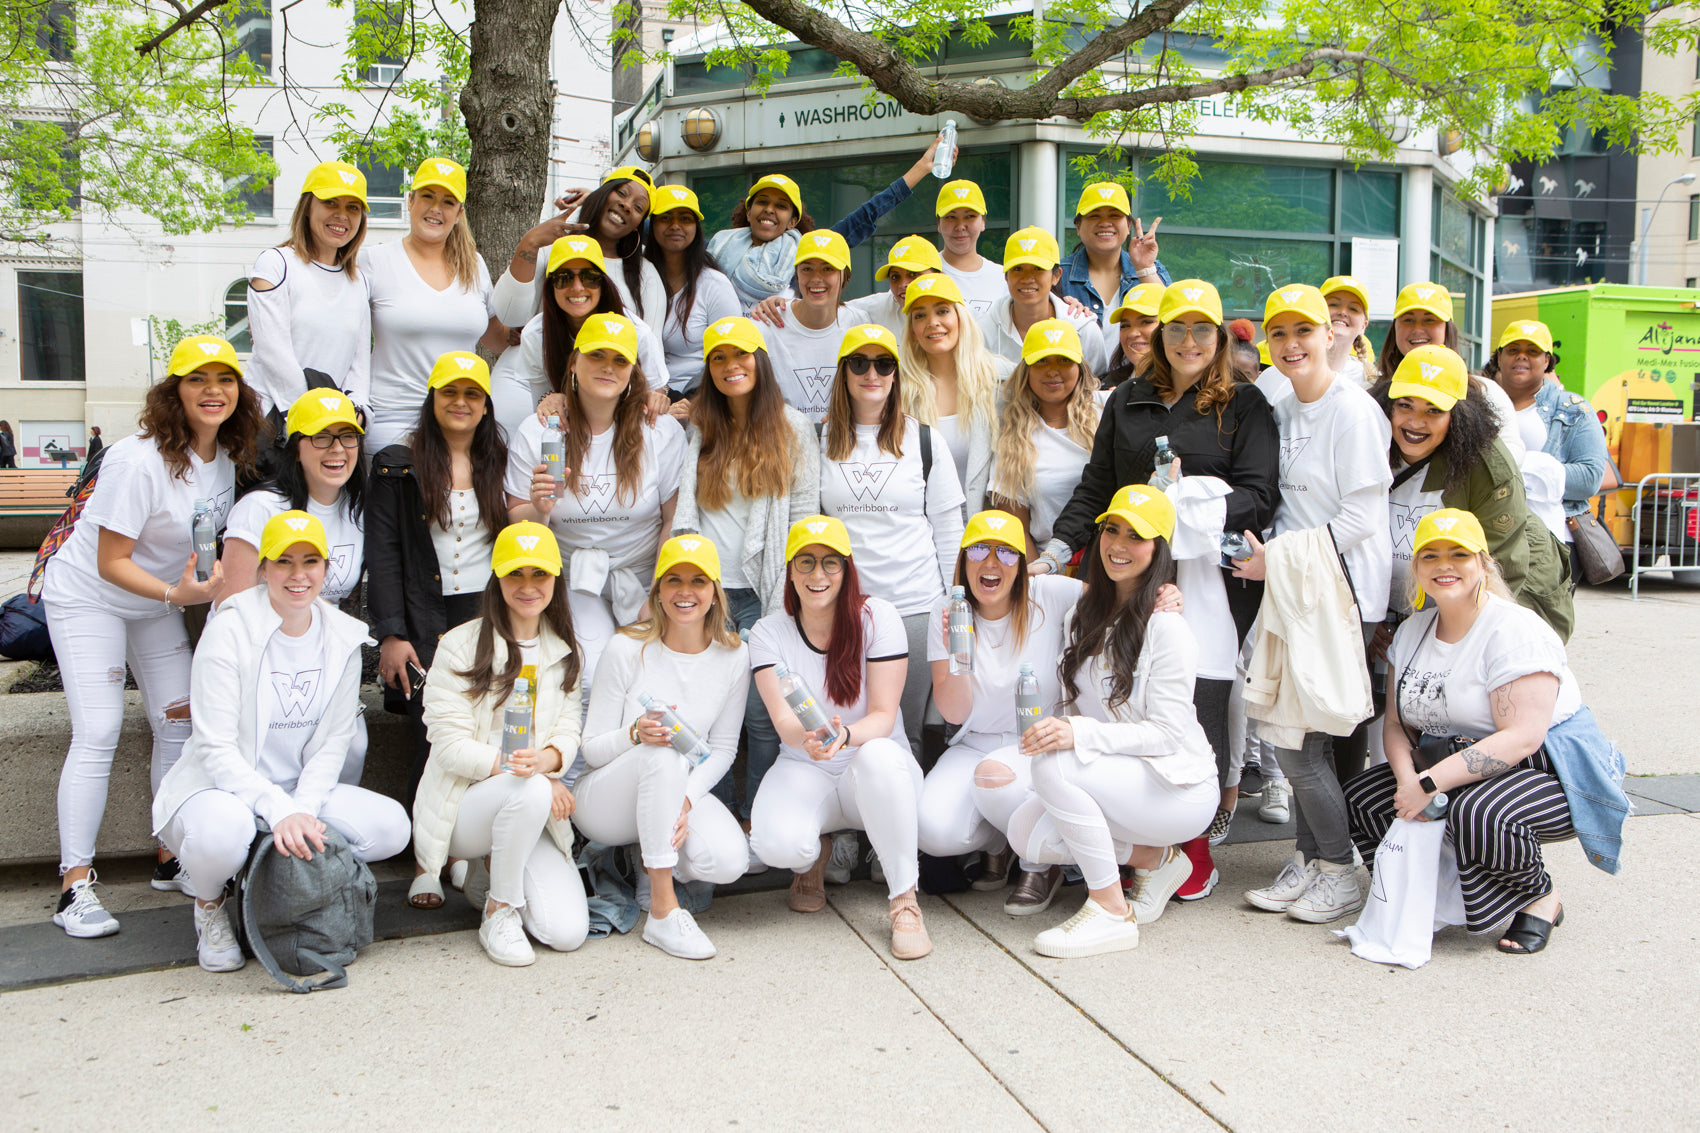 WAXON Laser and Wax Bar team outside celebrating. All staff are wearing white outfits with yellow hats in the WAXON Brand colours.